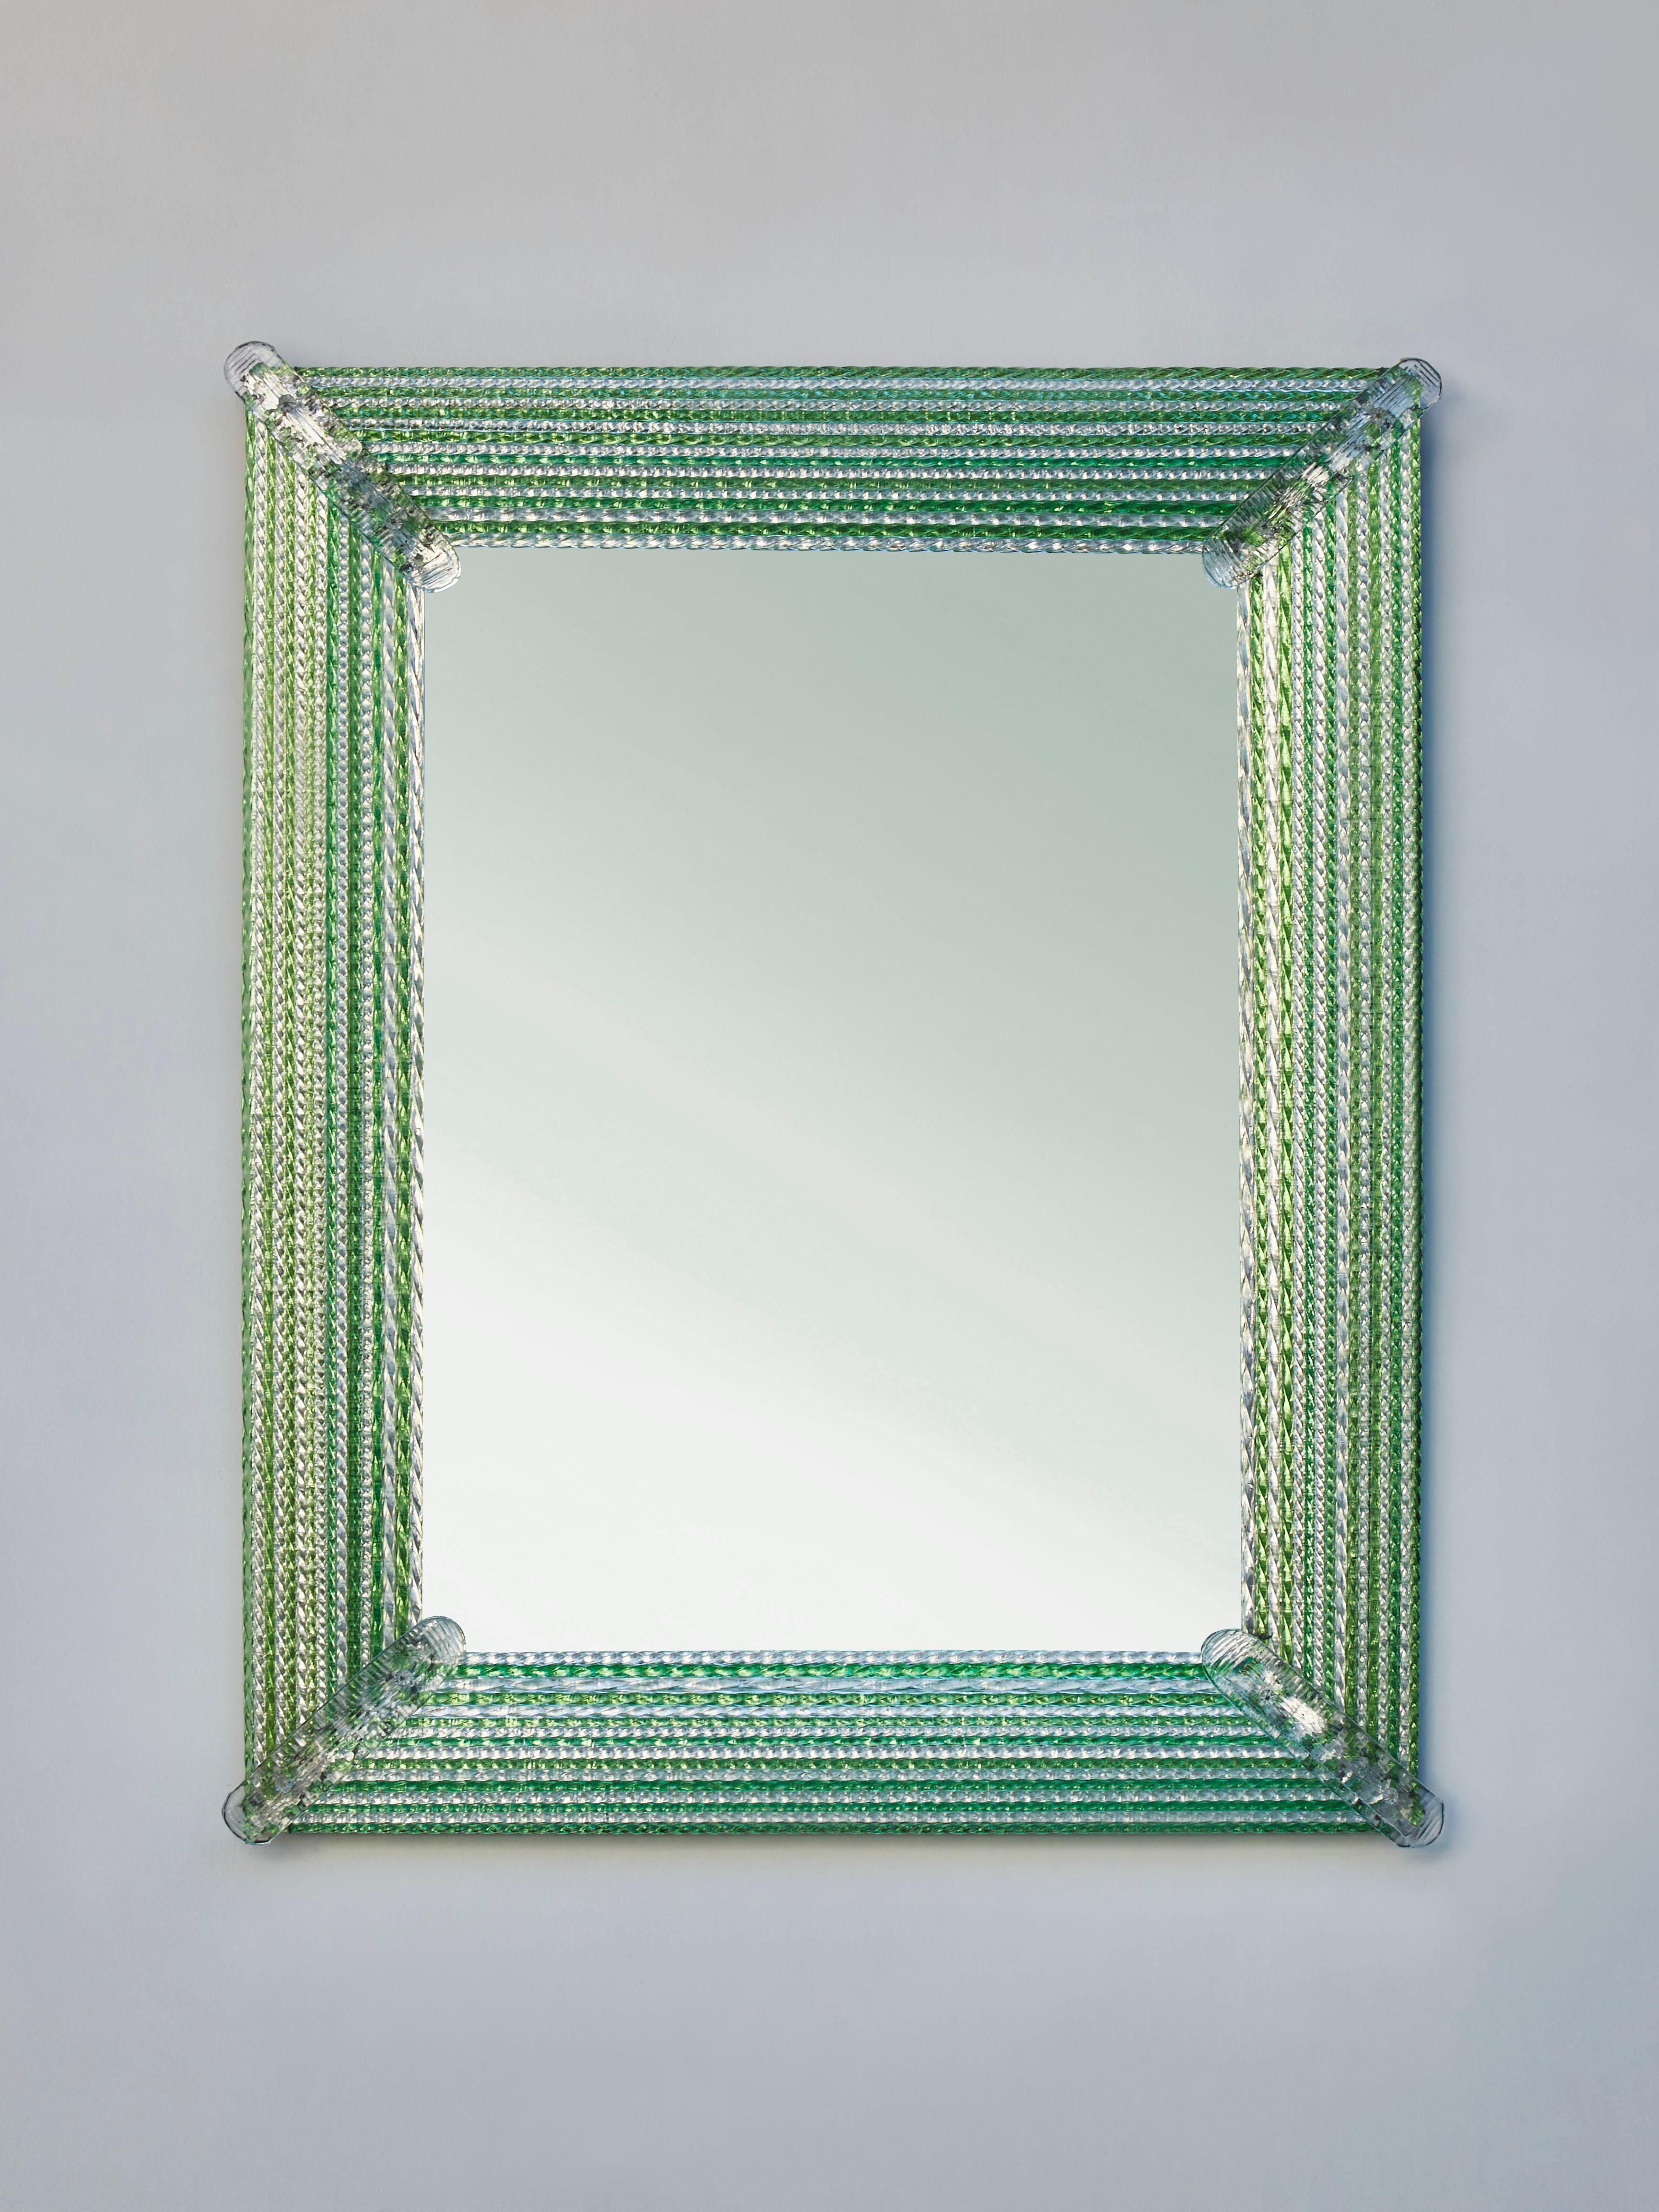 Exceptional mirror with a frame in sculpted and braided Murano glass.
Creation by Studio Glustin.
Italy, 2021.

(Pair available)